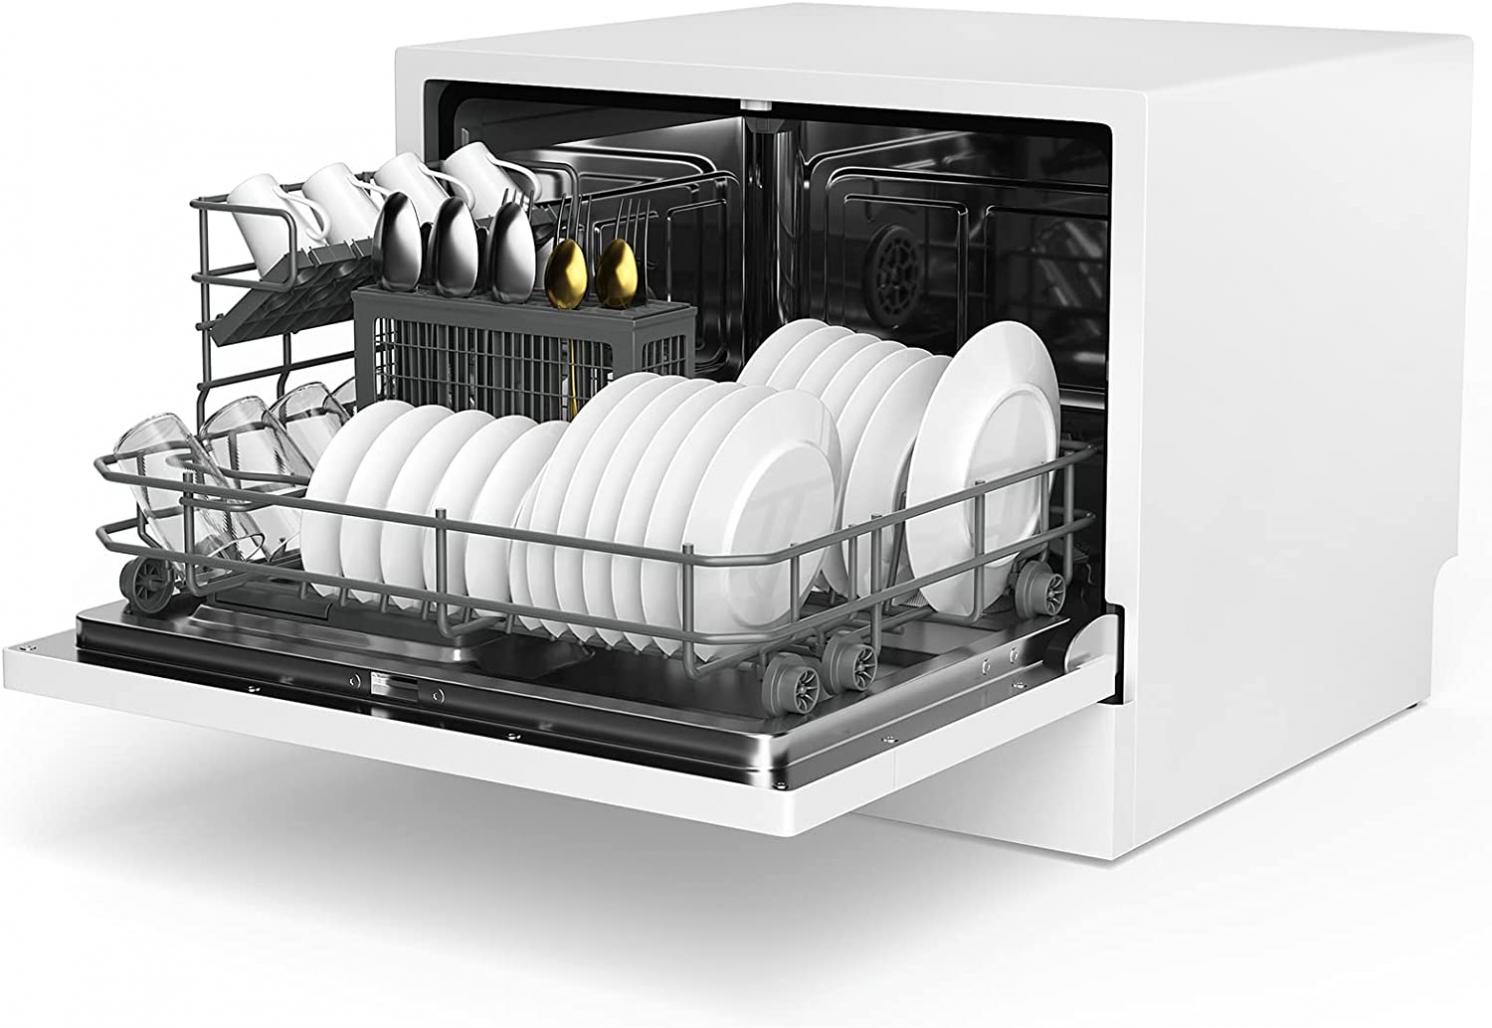 PETSITE Countertop Dishwasher, Portable Dishwasher w/ 5 Washing Programs, 6 Place Settings, 360° Dual Spray, High-Temperature Drying, Compact Kitchen Dishwasher for Dorm, RV, Small Apartment